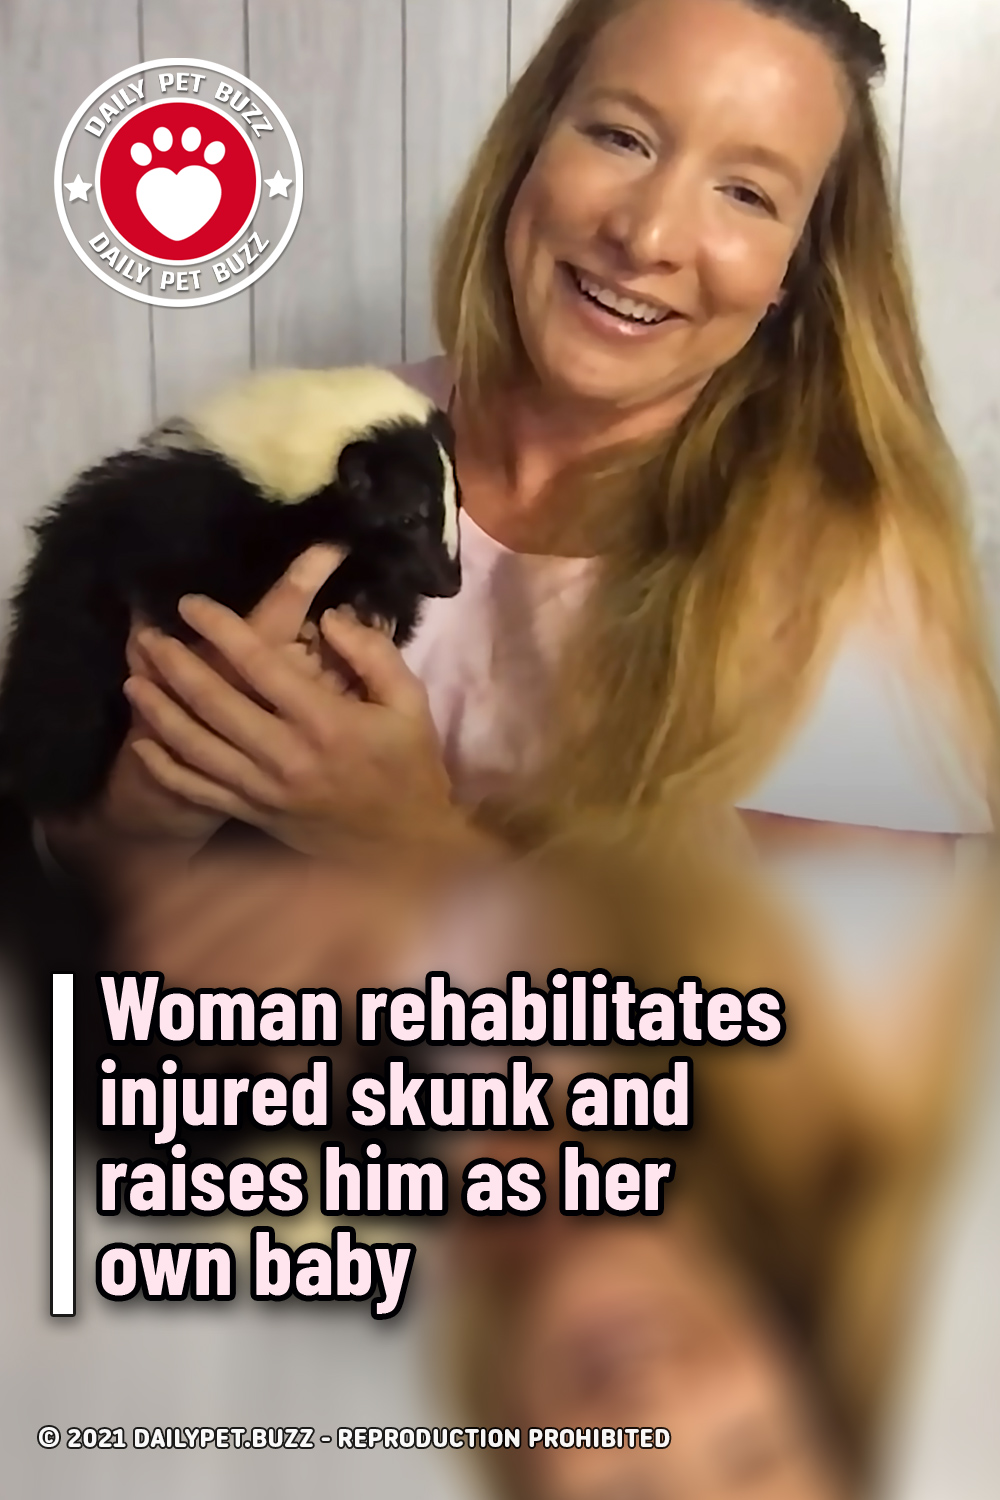 Woman rehabilitates injured skunk and raises him as her own baby